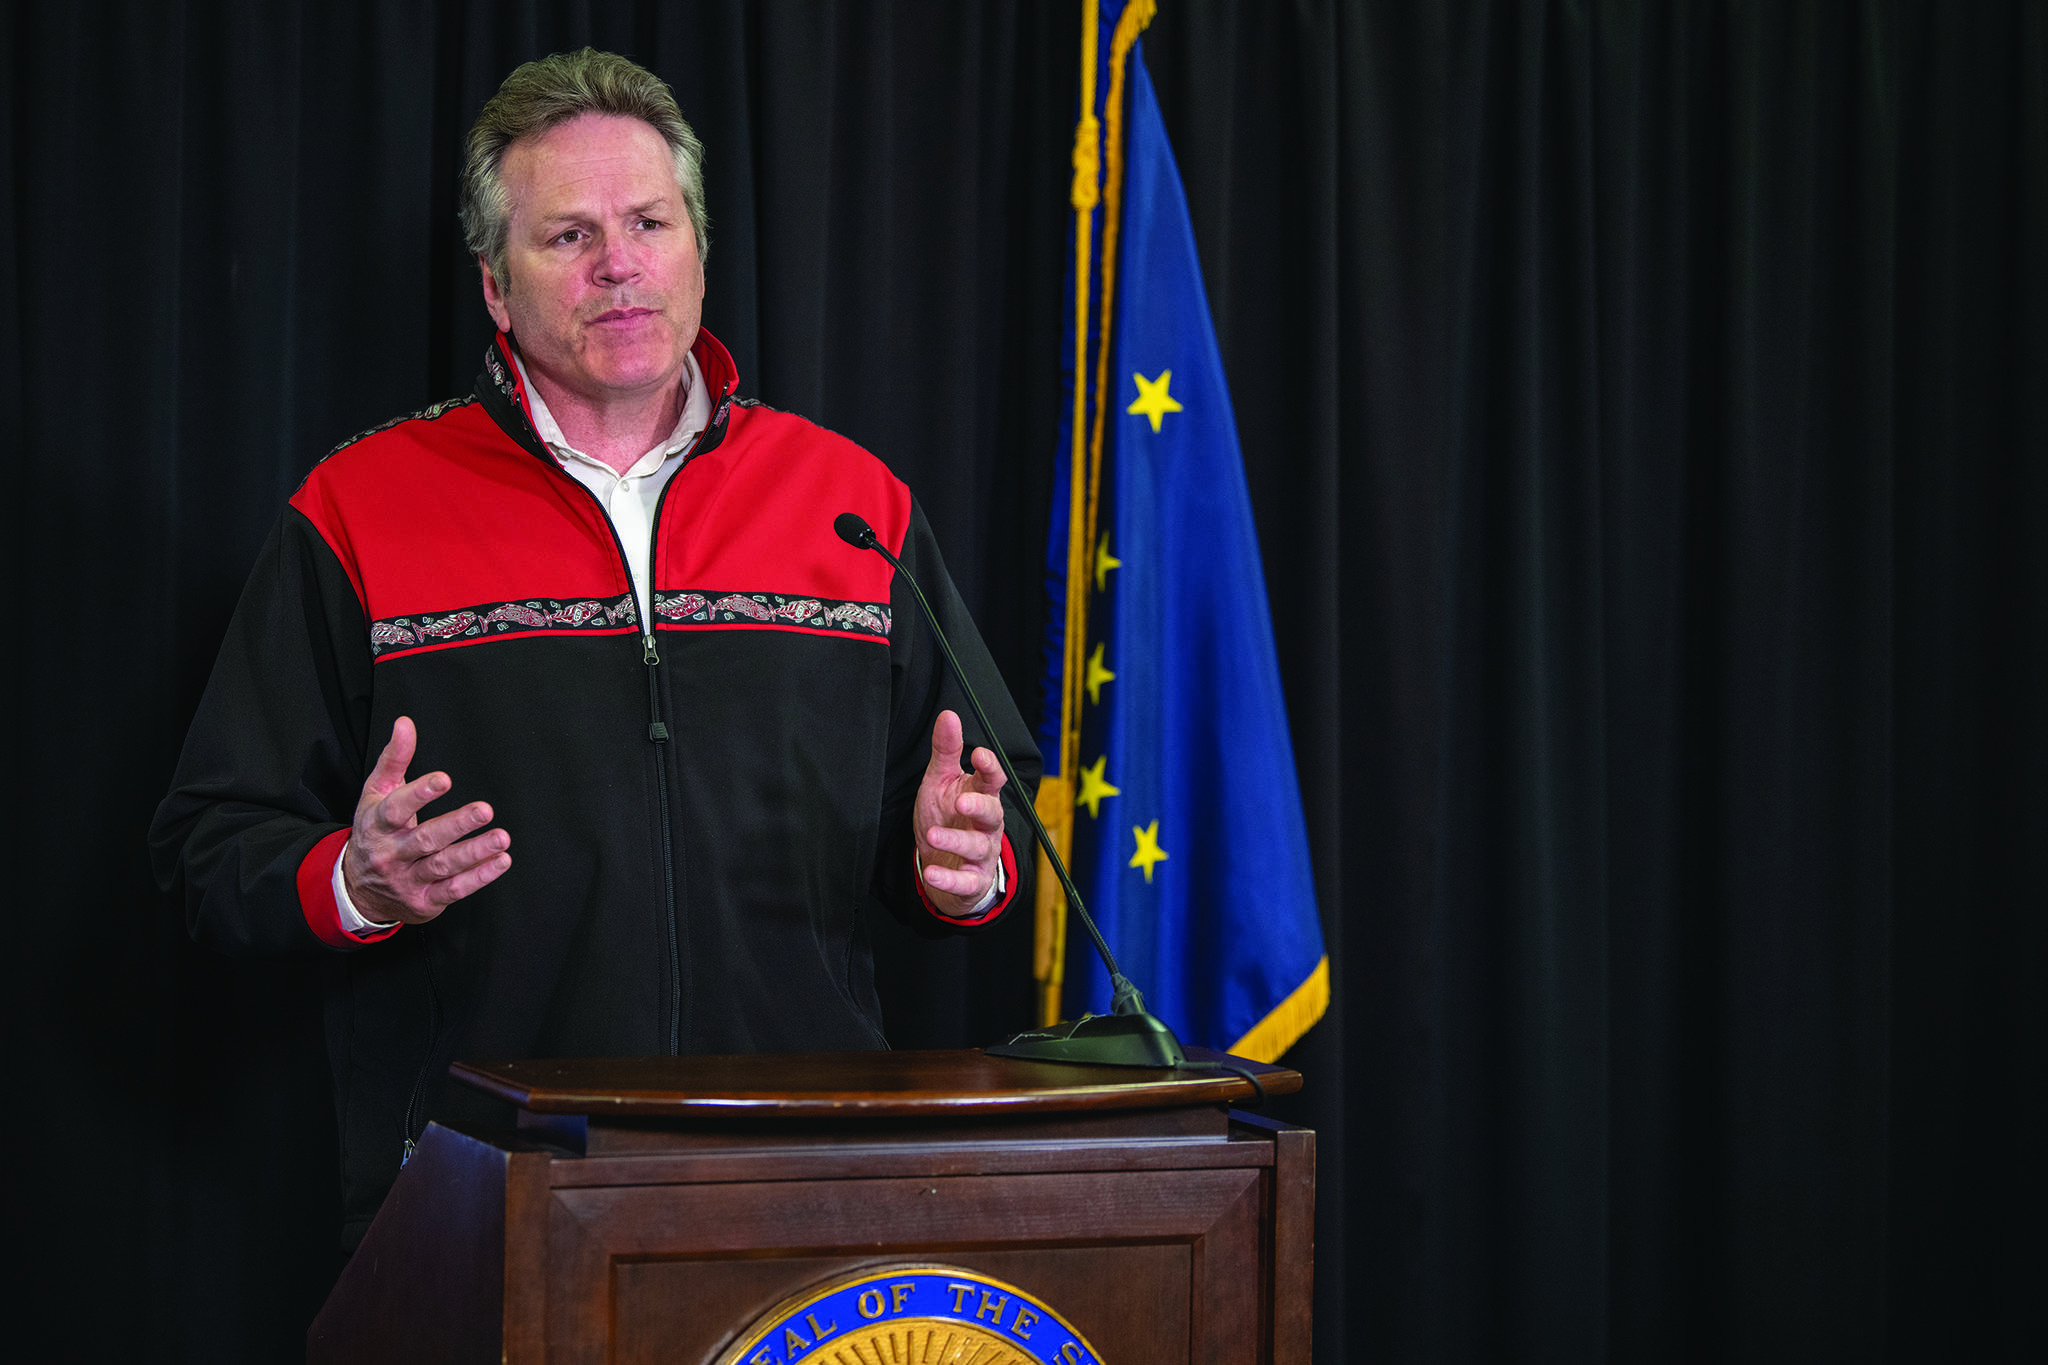 Gov. Mike Dunleavy speaks at a press conference on May 11, 2020, in the Atwood Building in Anchorage, Alaska. (Photo by Austin McDaniel/Office of the Governor)